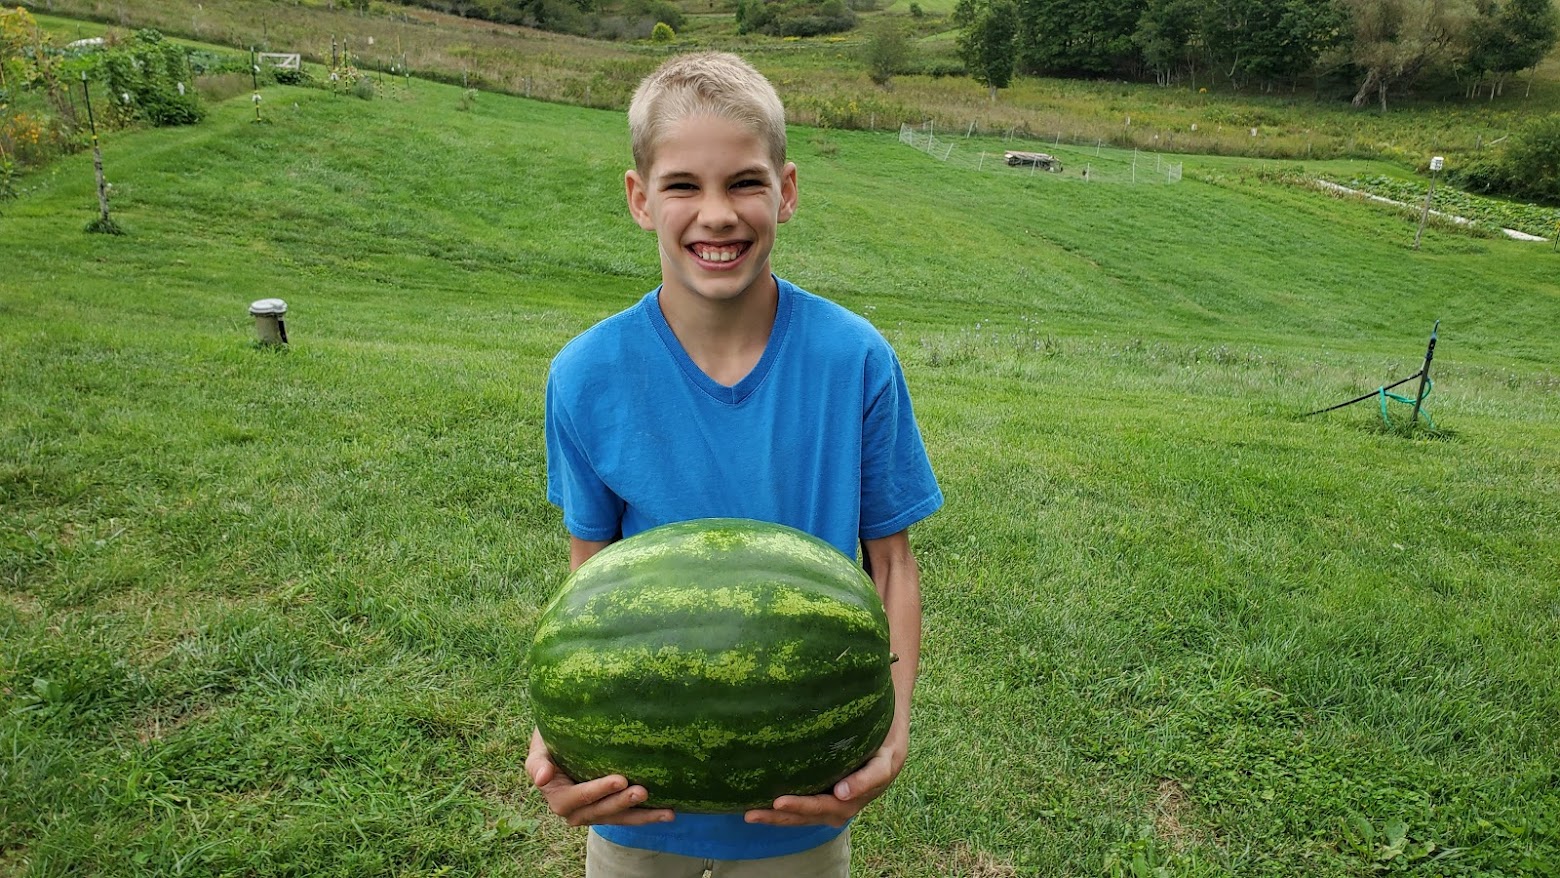 Holding a large Heirloom Watermelon in both arms.